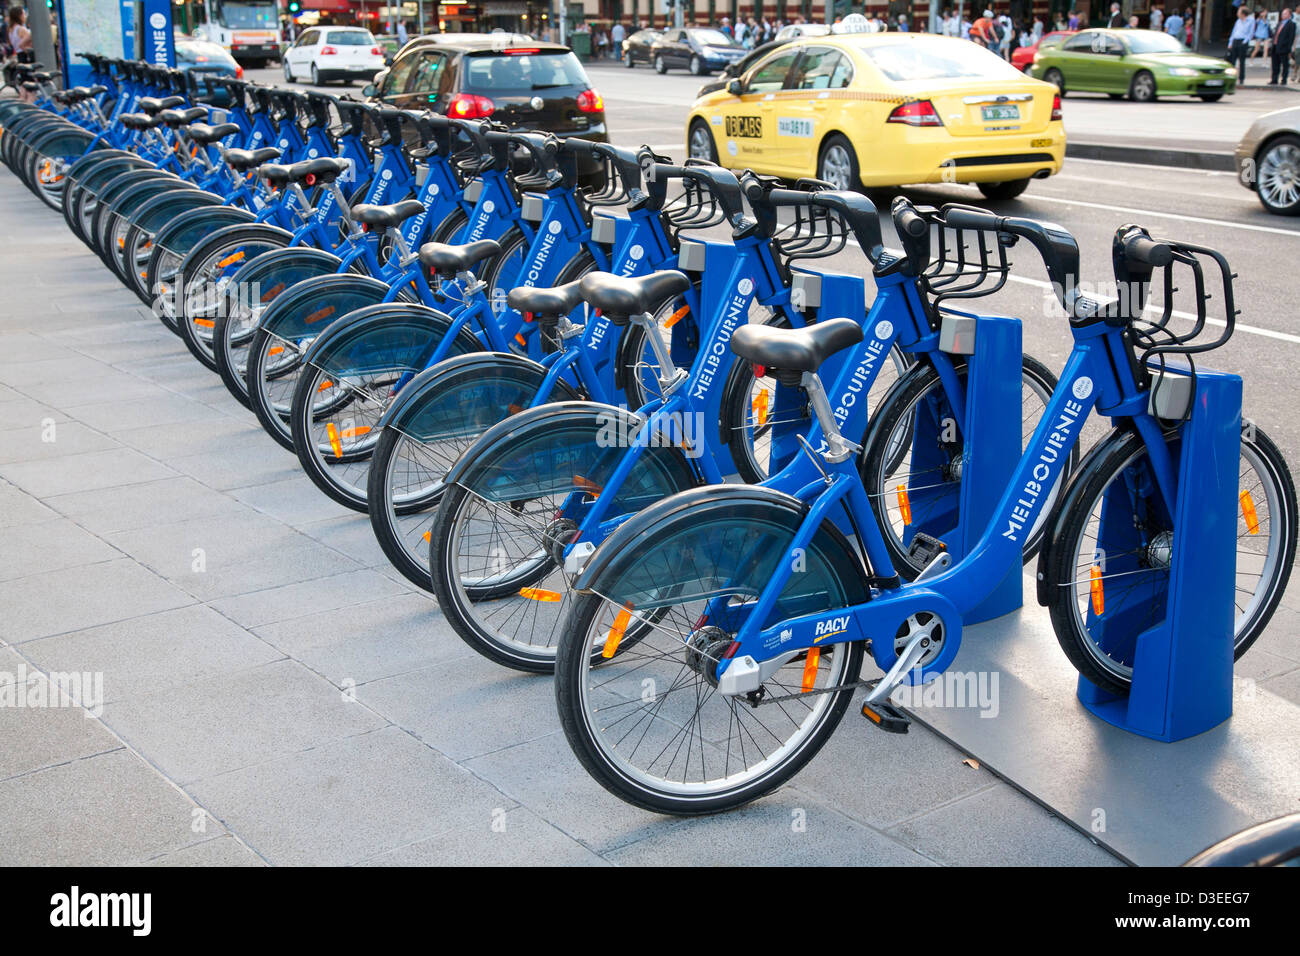 Hire bicycle racks-pay by the hour- innovative idea for transportation in Melbourne Victoria Australia Stock Photo